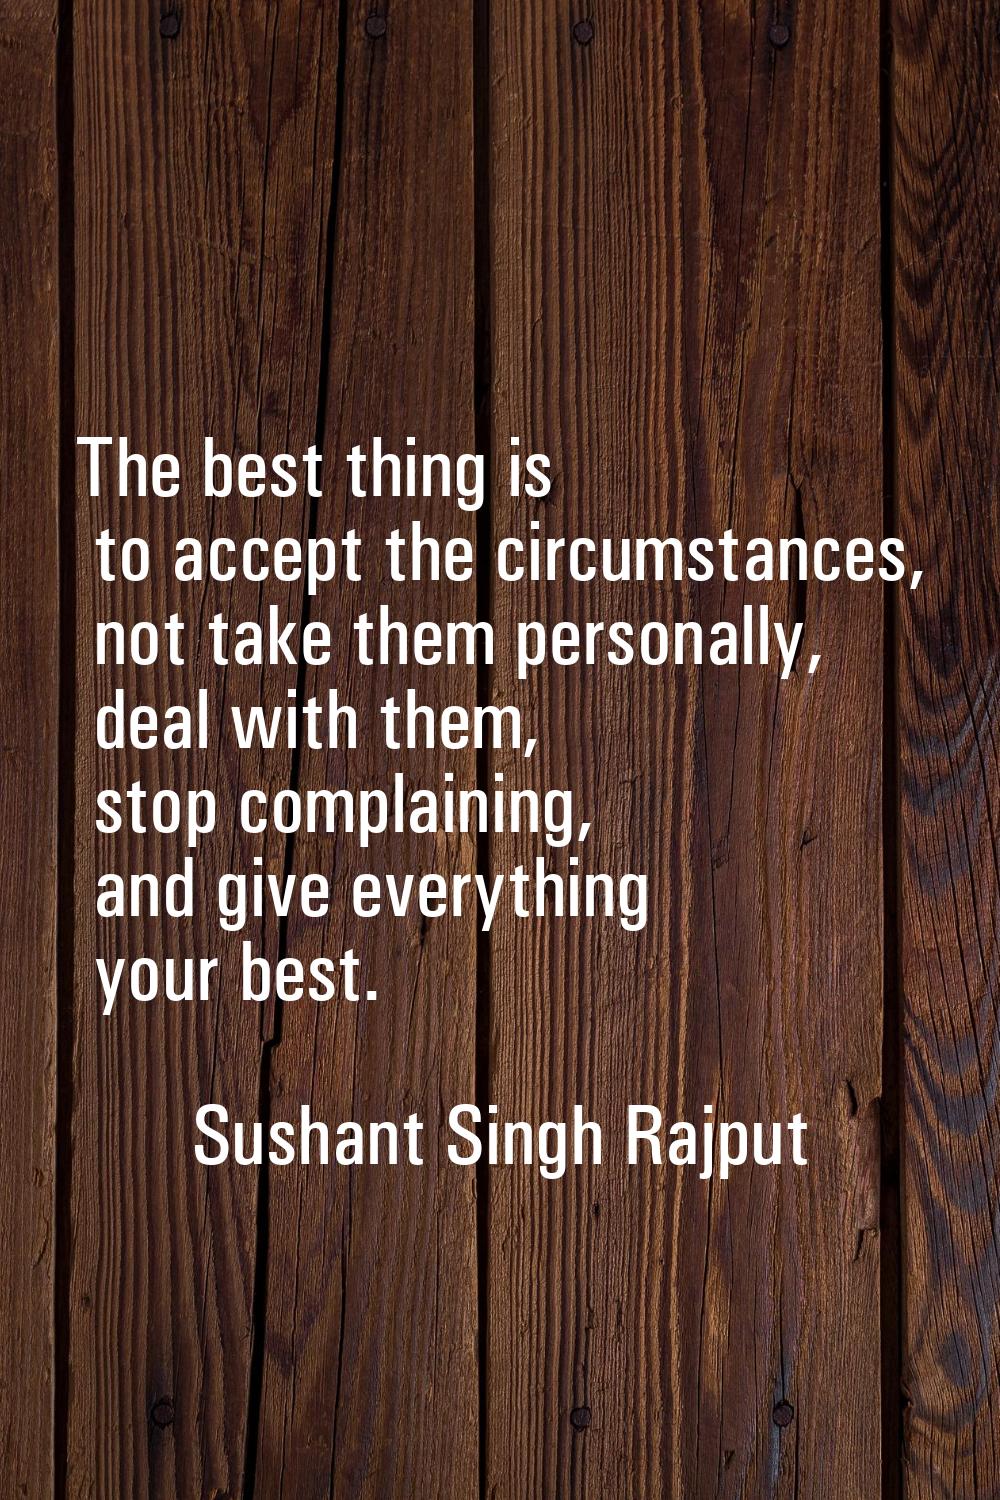 The best thing is to accept the circumstances, not take them personally, deal with them, stop compl